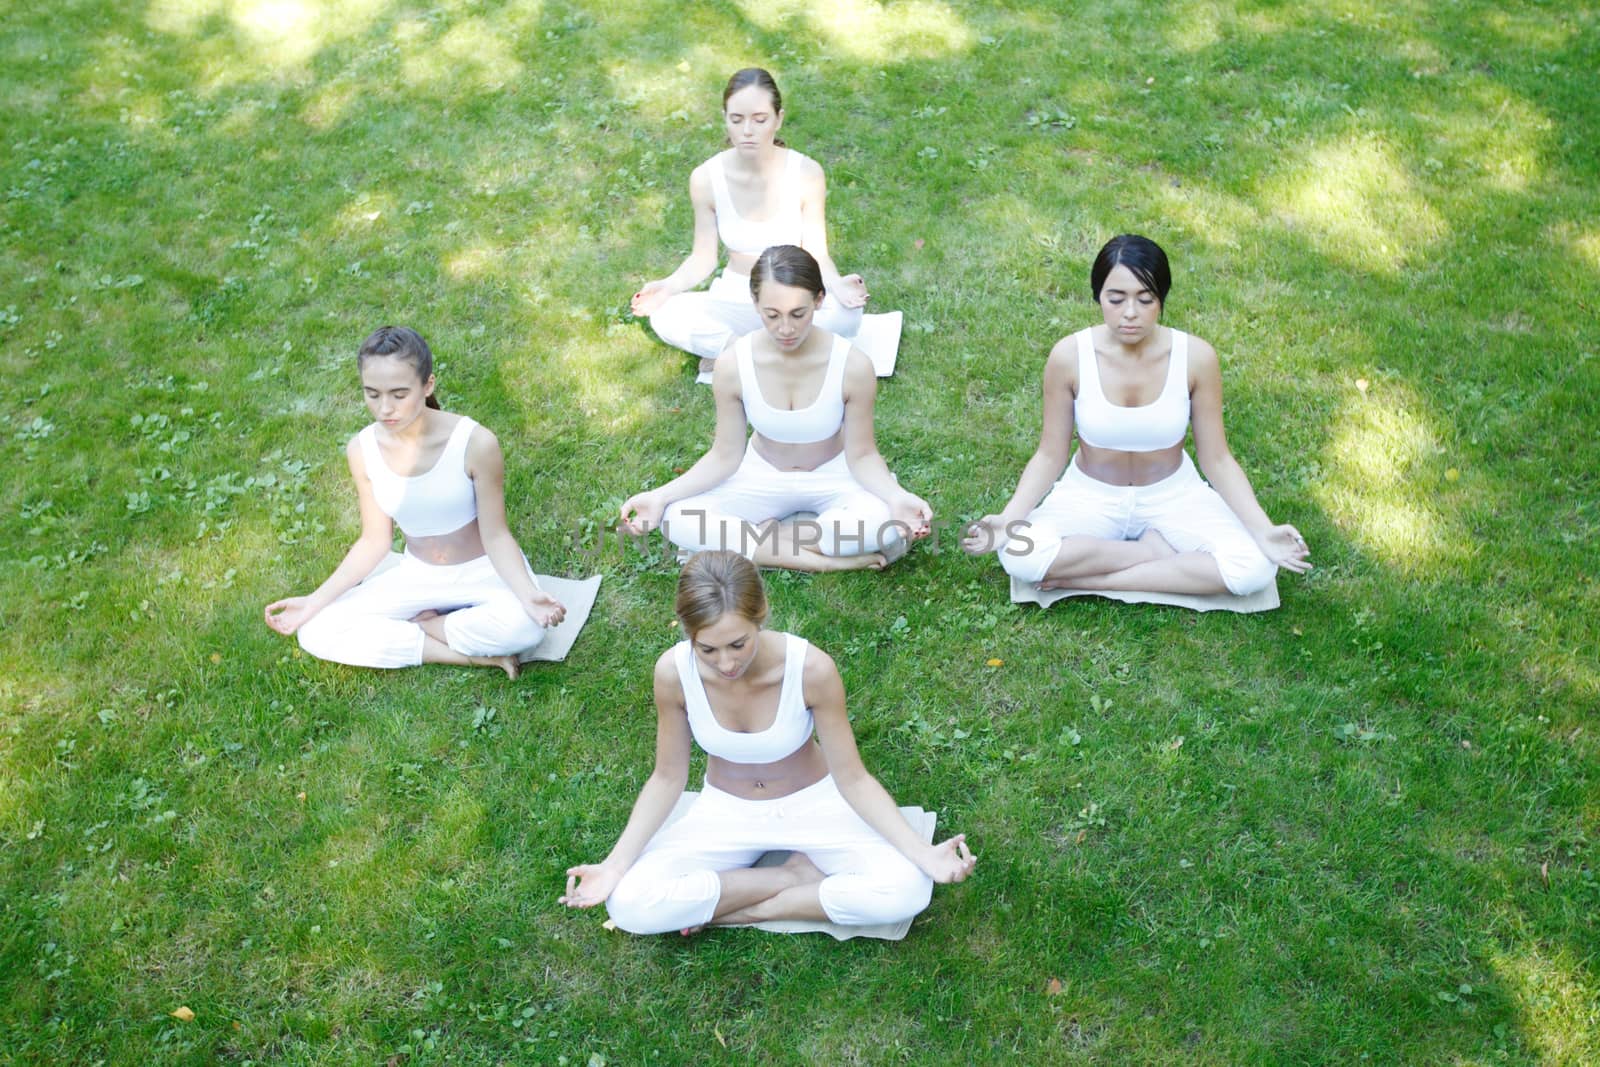 Yoga group training at park by ALotOfPeople